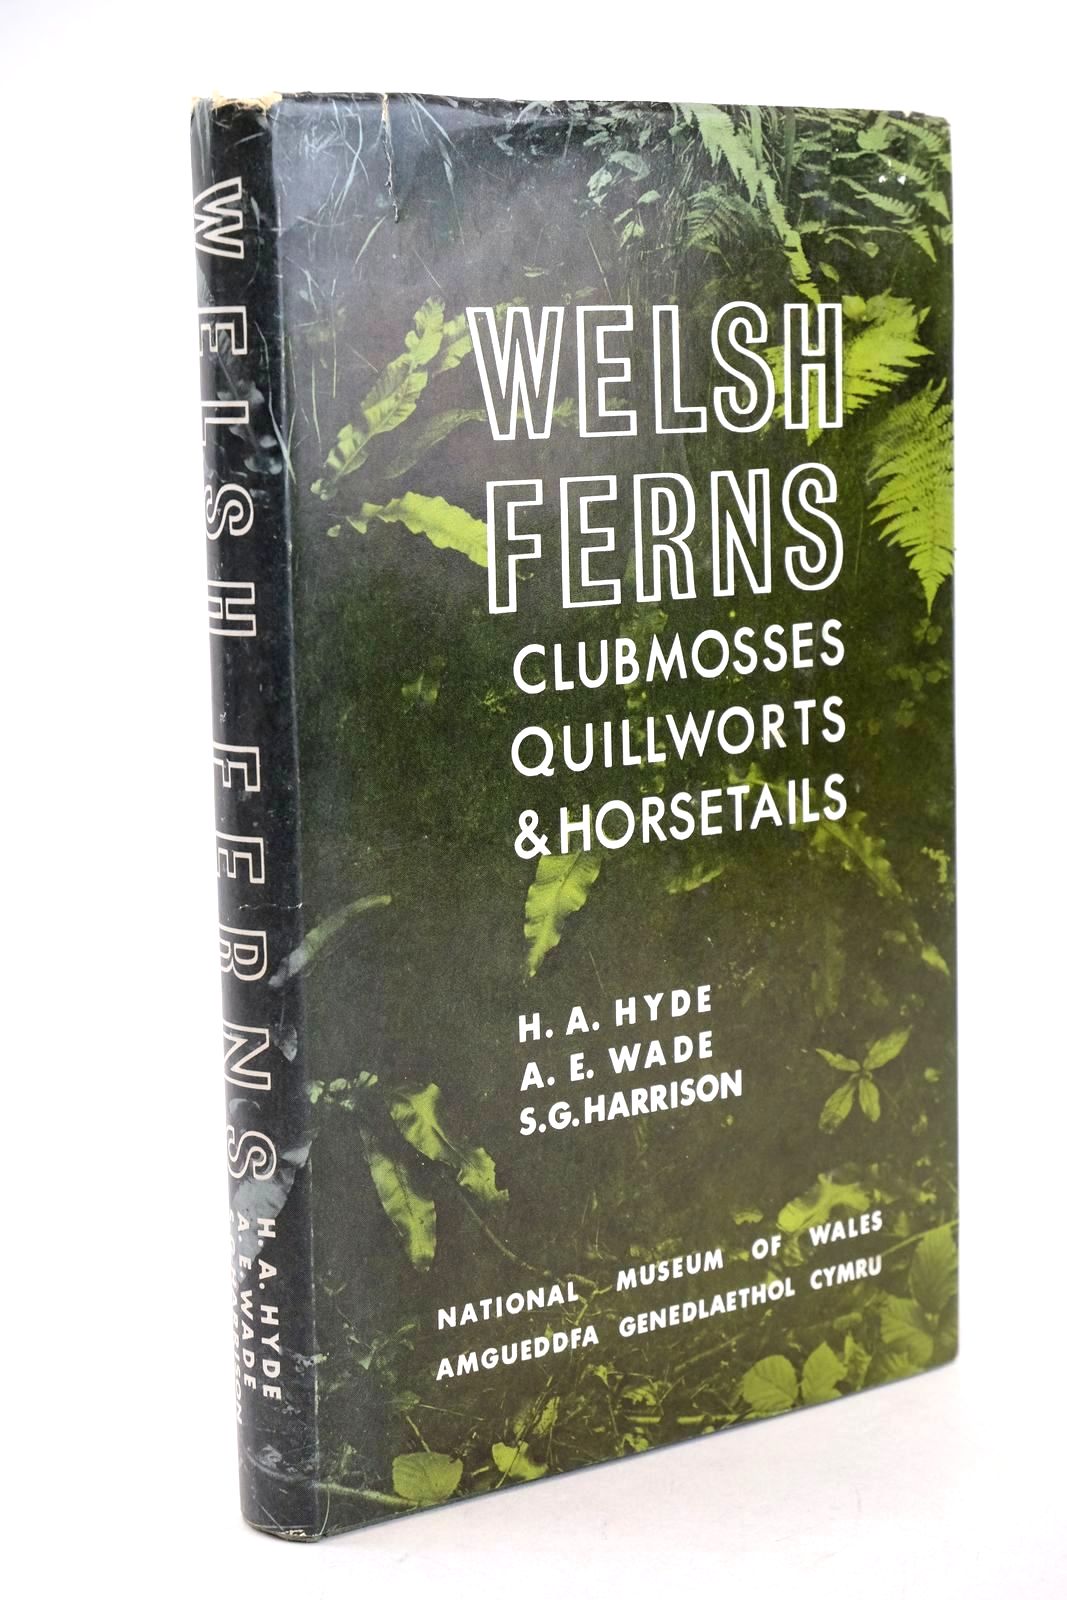 Photo of WELSH FERNS CLUBMOSSES QUILLWORTS & HORSETAILS written by Hyde, H.A. Wade, A.E. Harrison, S.G. published by National Museum of Wales (STOCK CODE: 1326537)  for sale by Stella & Rose's Books